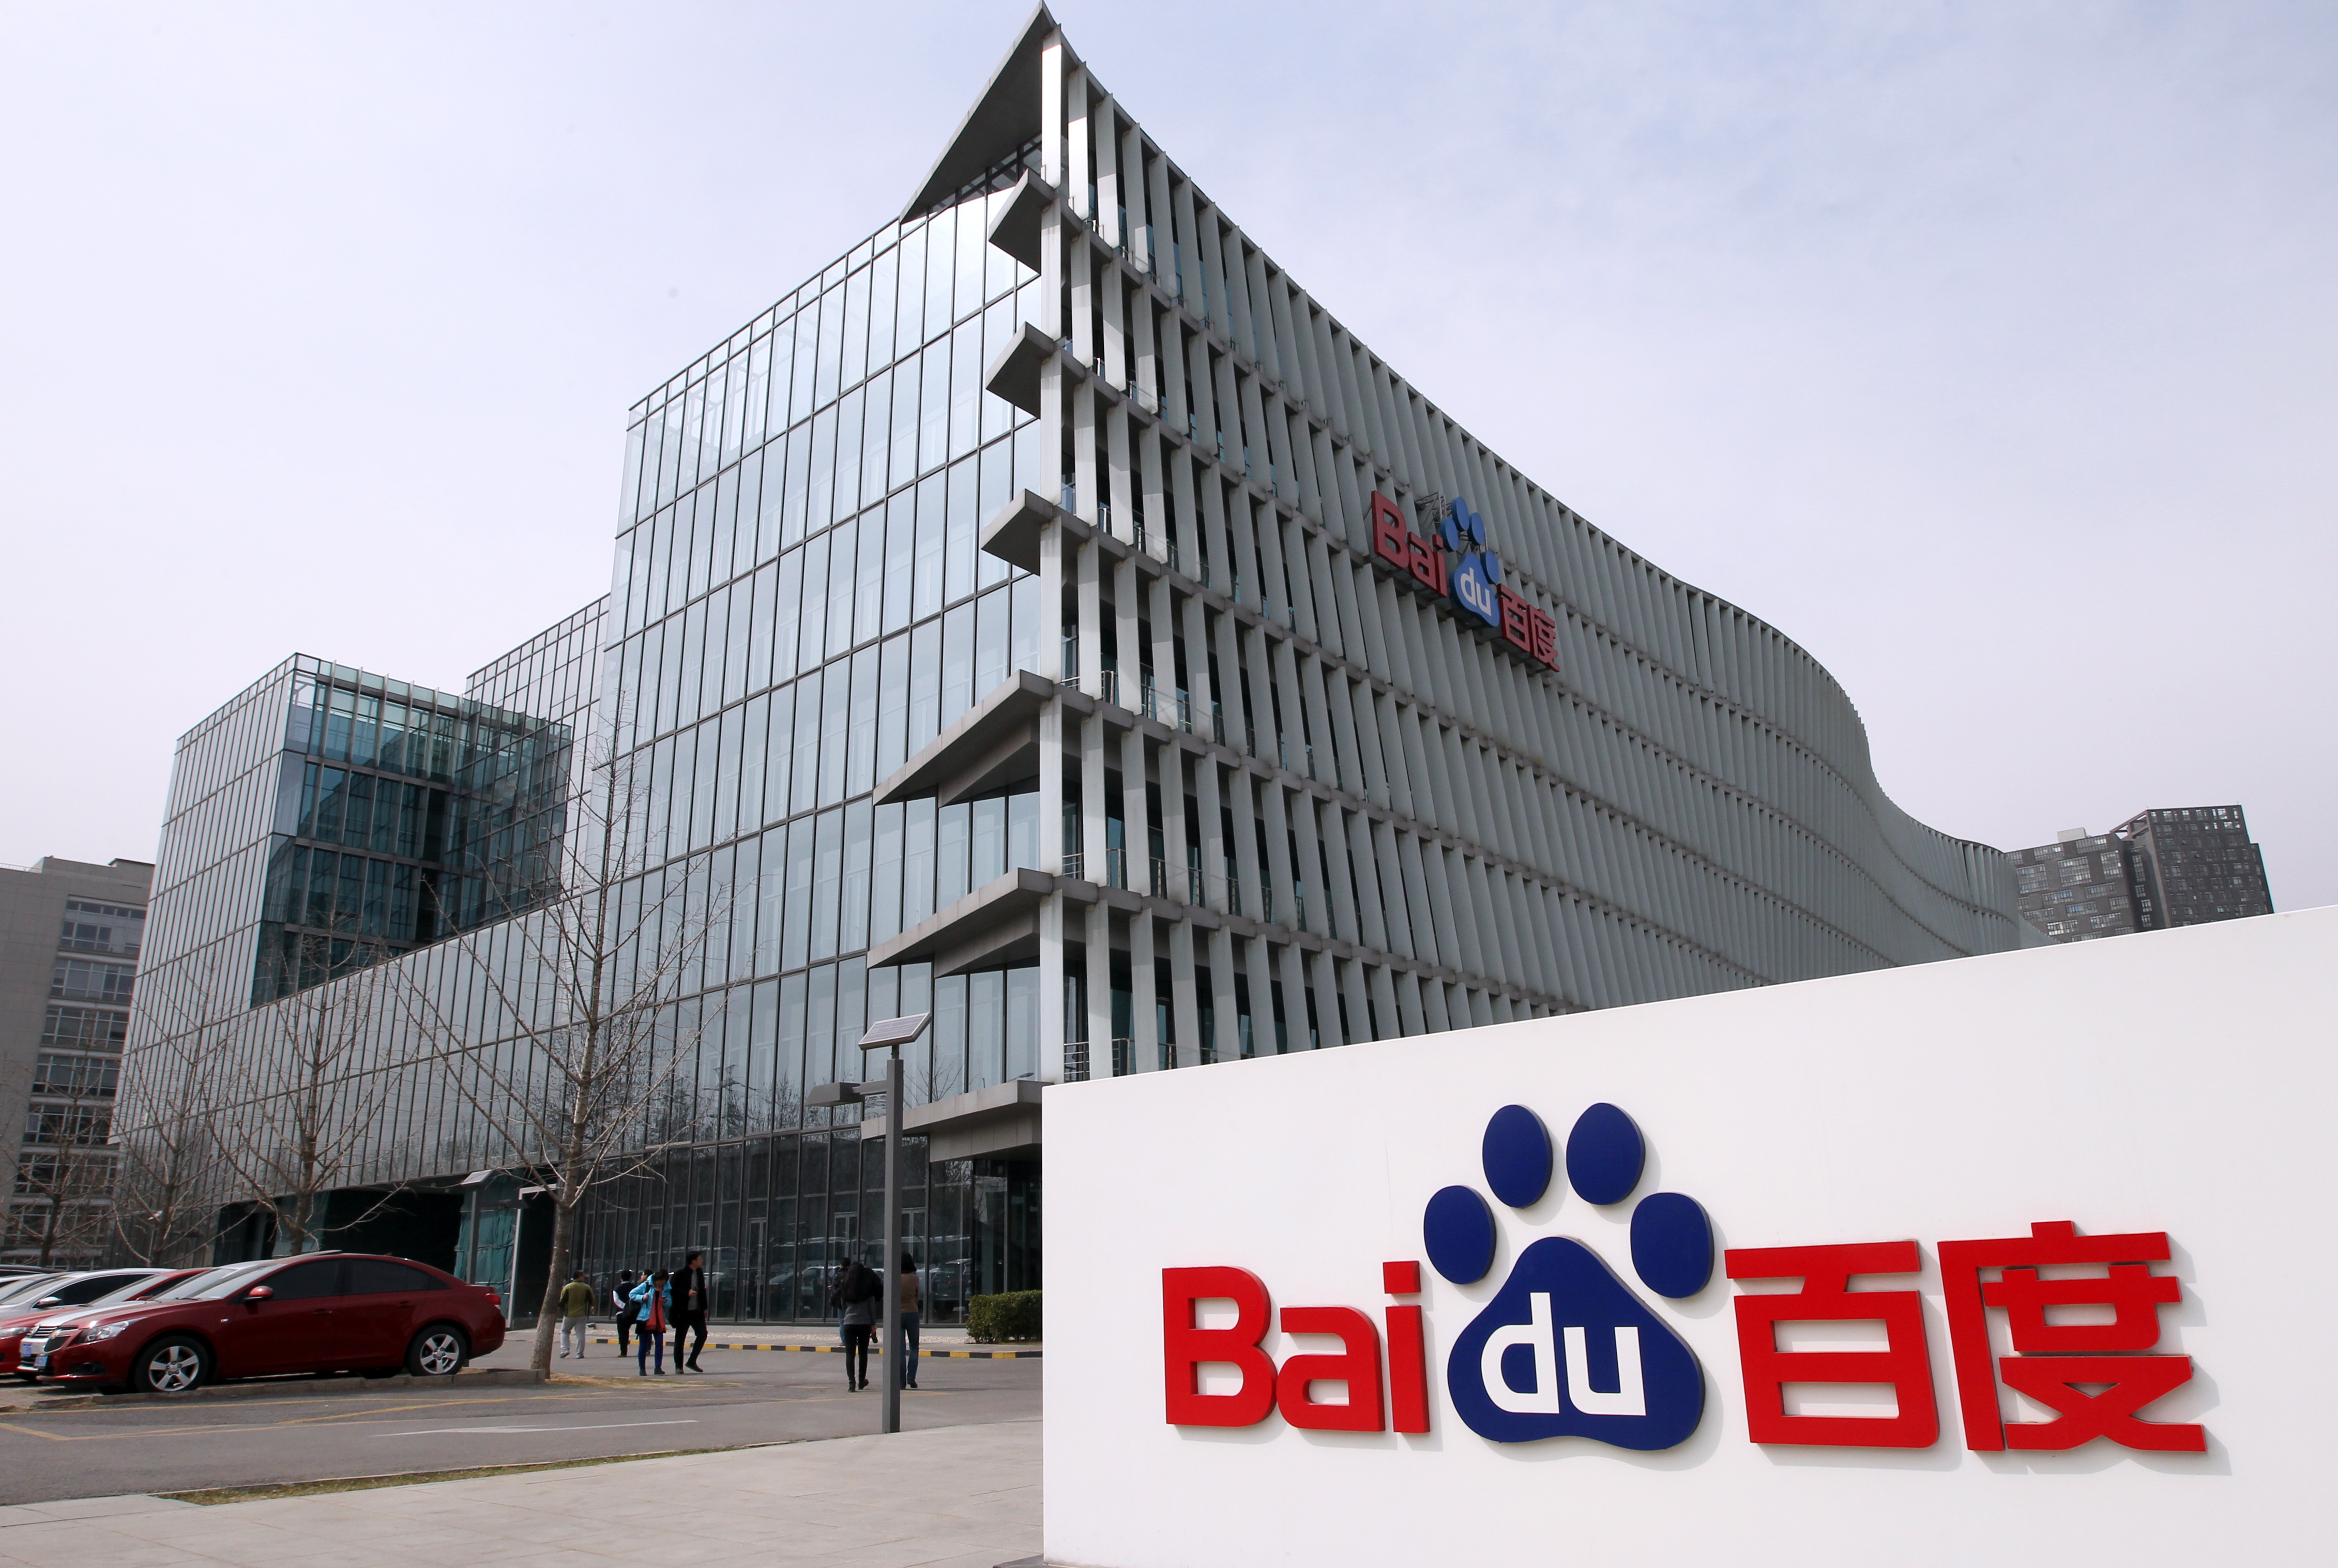 An exterior view of Baidu, the chinese search engine giant, in Beijing. 19MAR15 === Photo by Simon Song ===